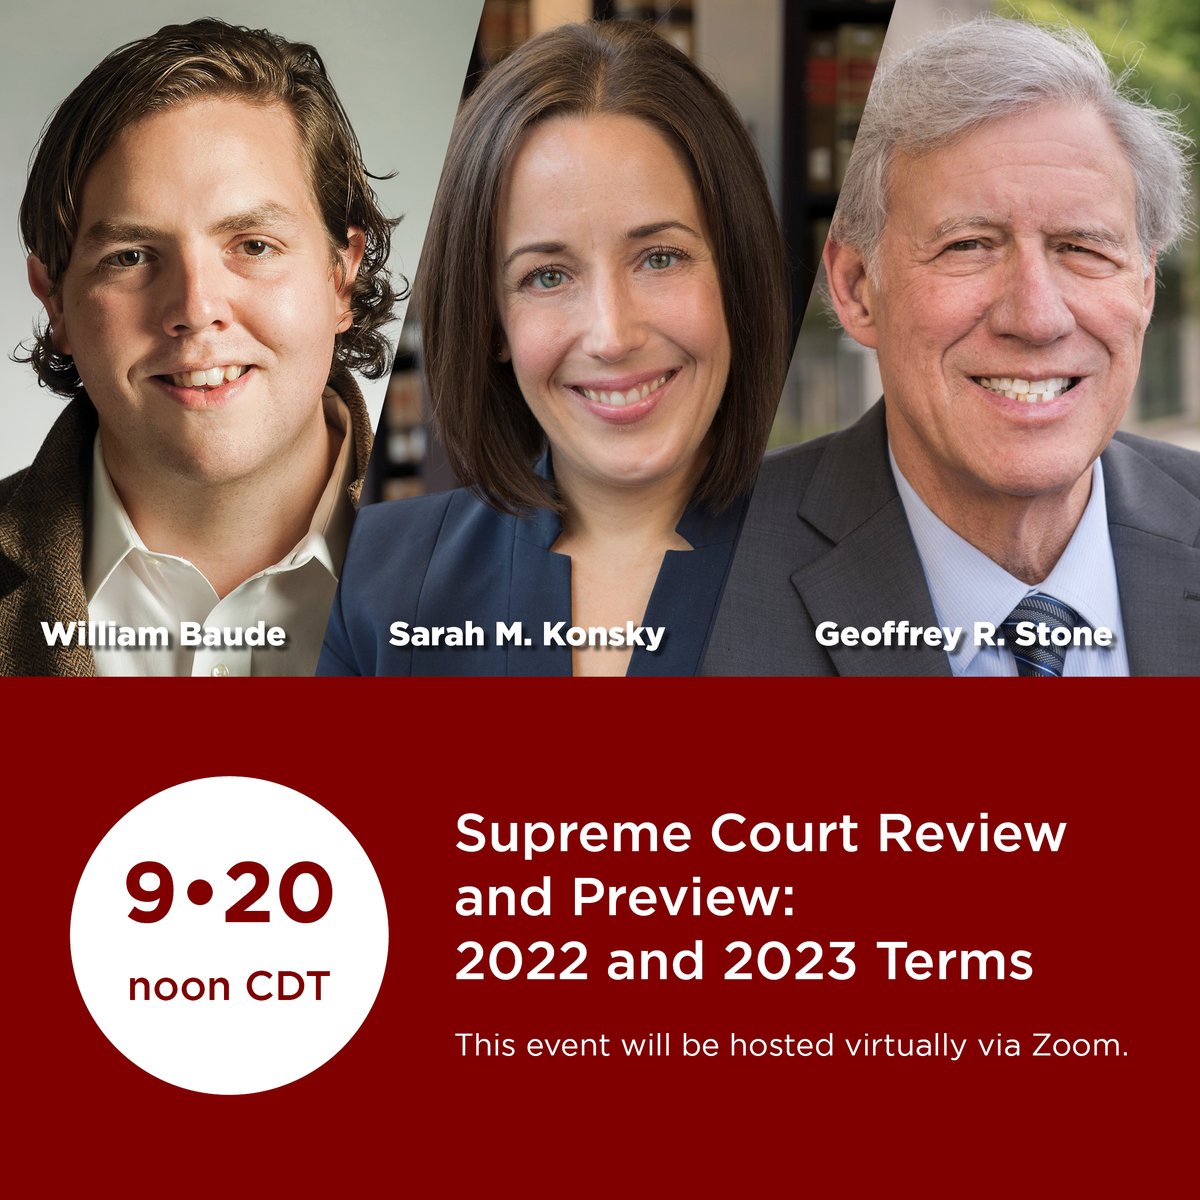 ALUMNI: Join Profs. William Baude (@WilliamBaude), Sarah Konsky (@skonsky), and Geoffrey Stone (@stone_geoffrey) at our virtual Supreme Court Review and Preview Program for insights into the key #SCOTUS cases from the past and upcoming term. Register: buff.ly/3RkdIim